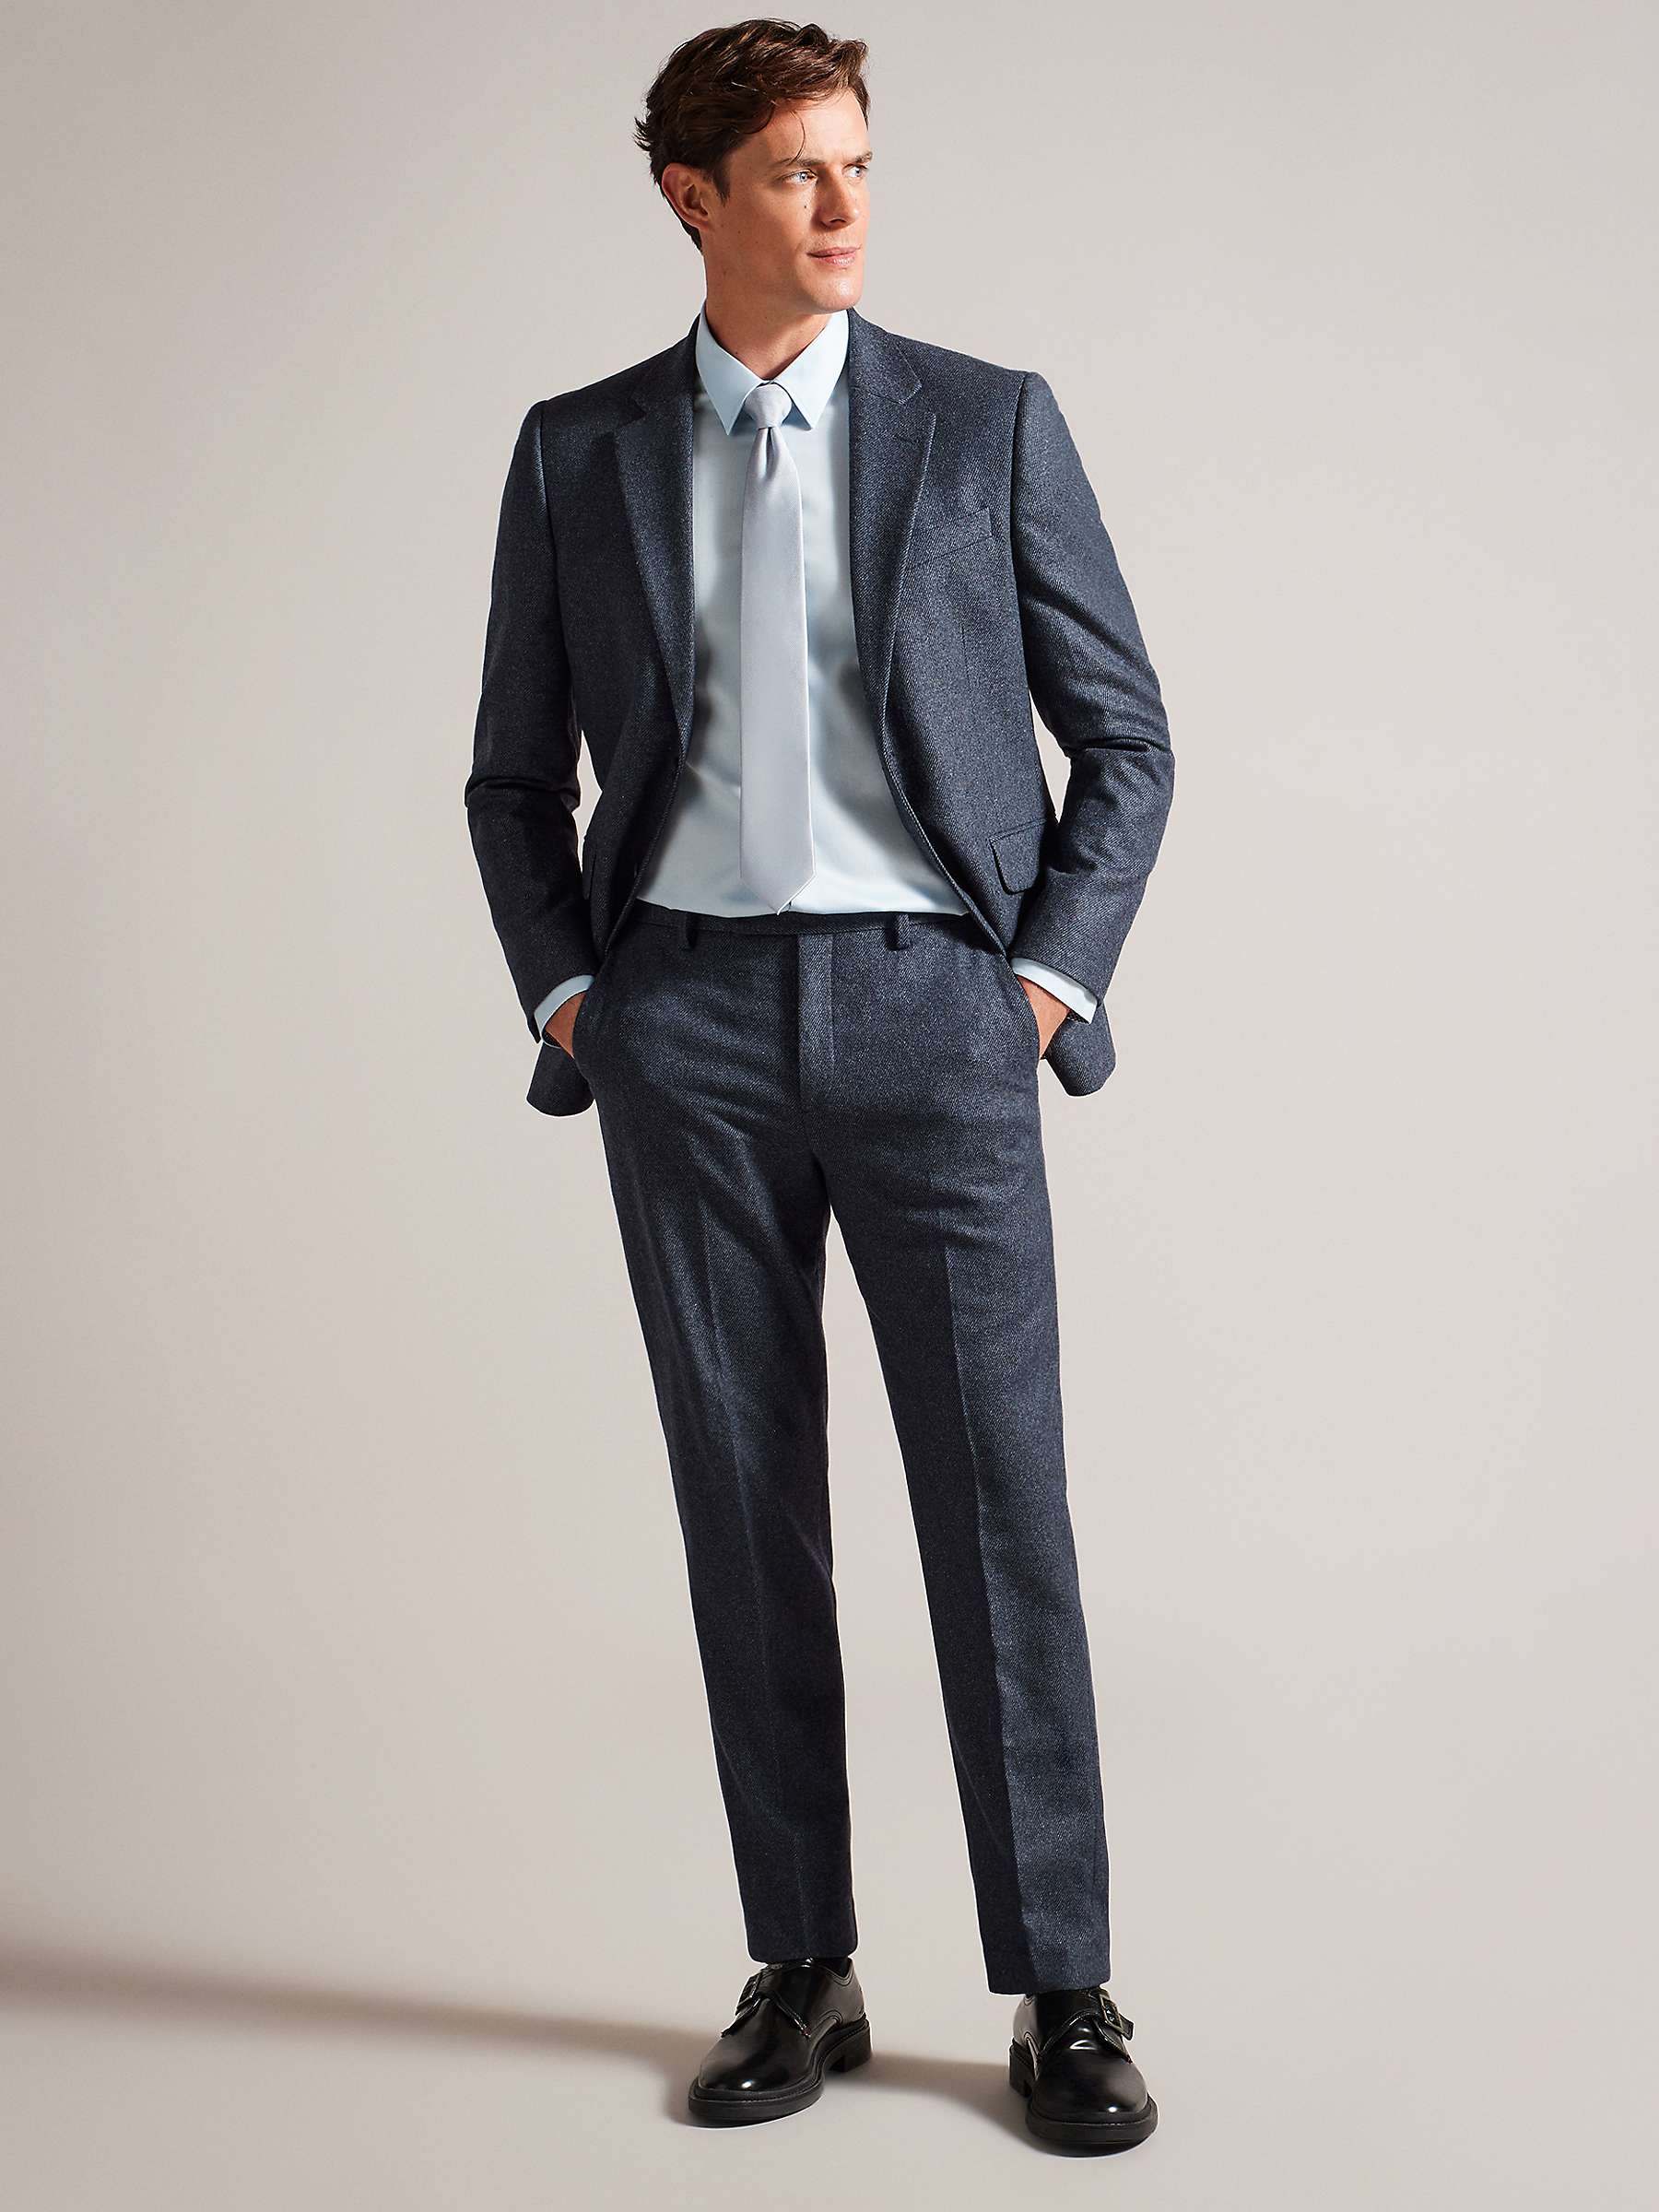 Buy Ted Baker Arthurt Slim Fit Wool Blend Tailored Trousers, Navy Online at johnlewis.com